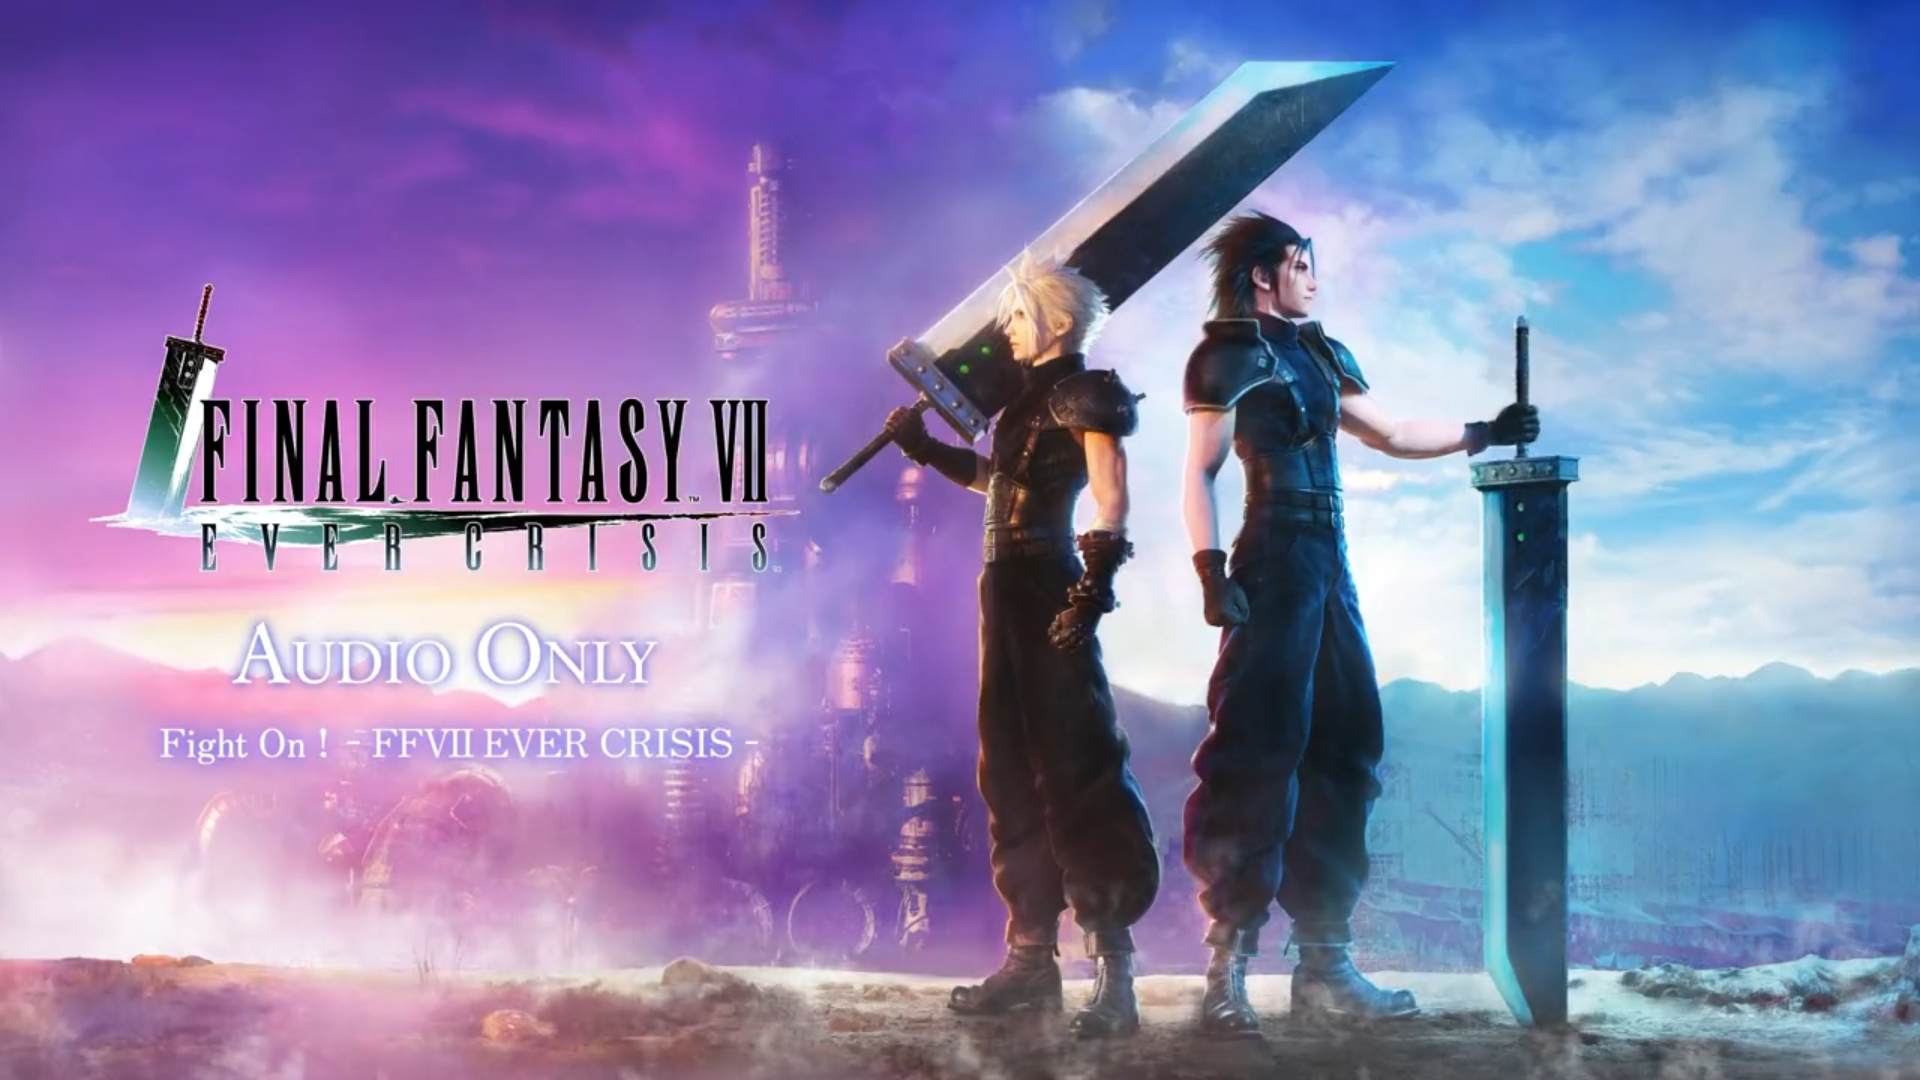  Final Fantasy VII: Ever Crisis Shares “Fight On!” Battle Theme